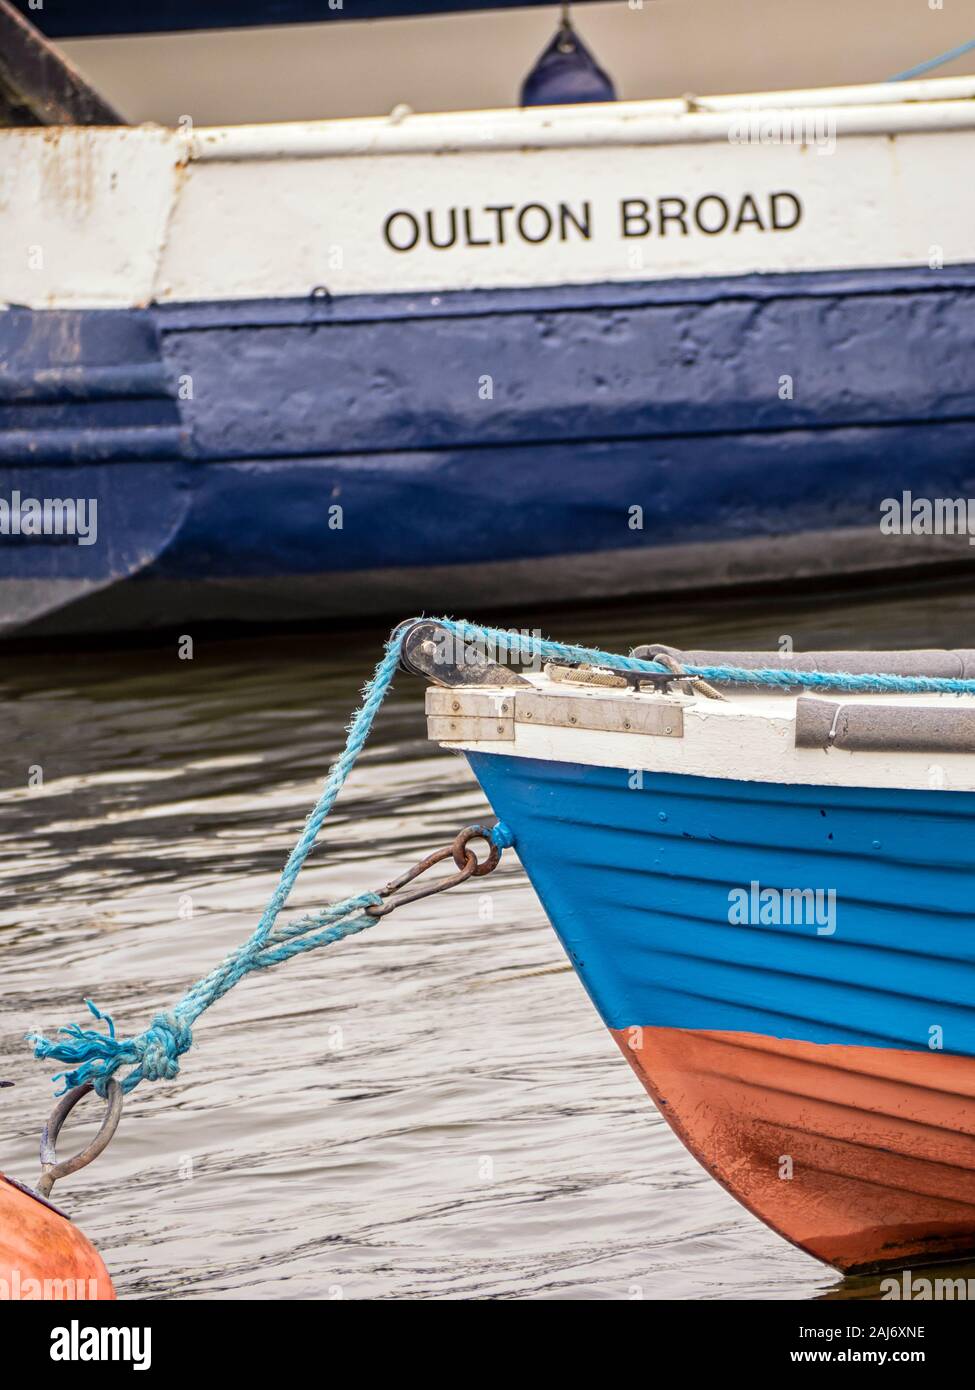 OULTON BROAD, SUFFOLK:  Small Dinghy and boat with location Stock Photo